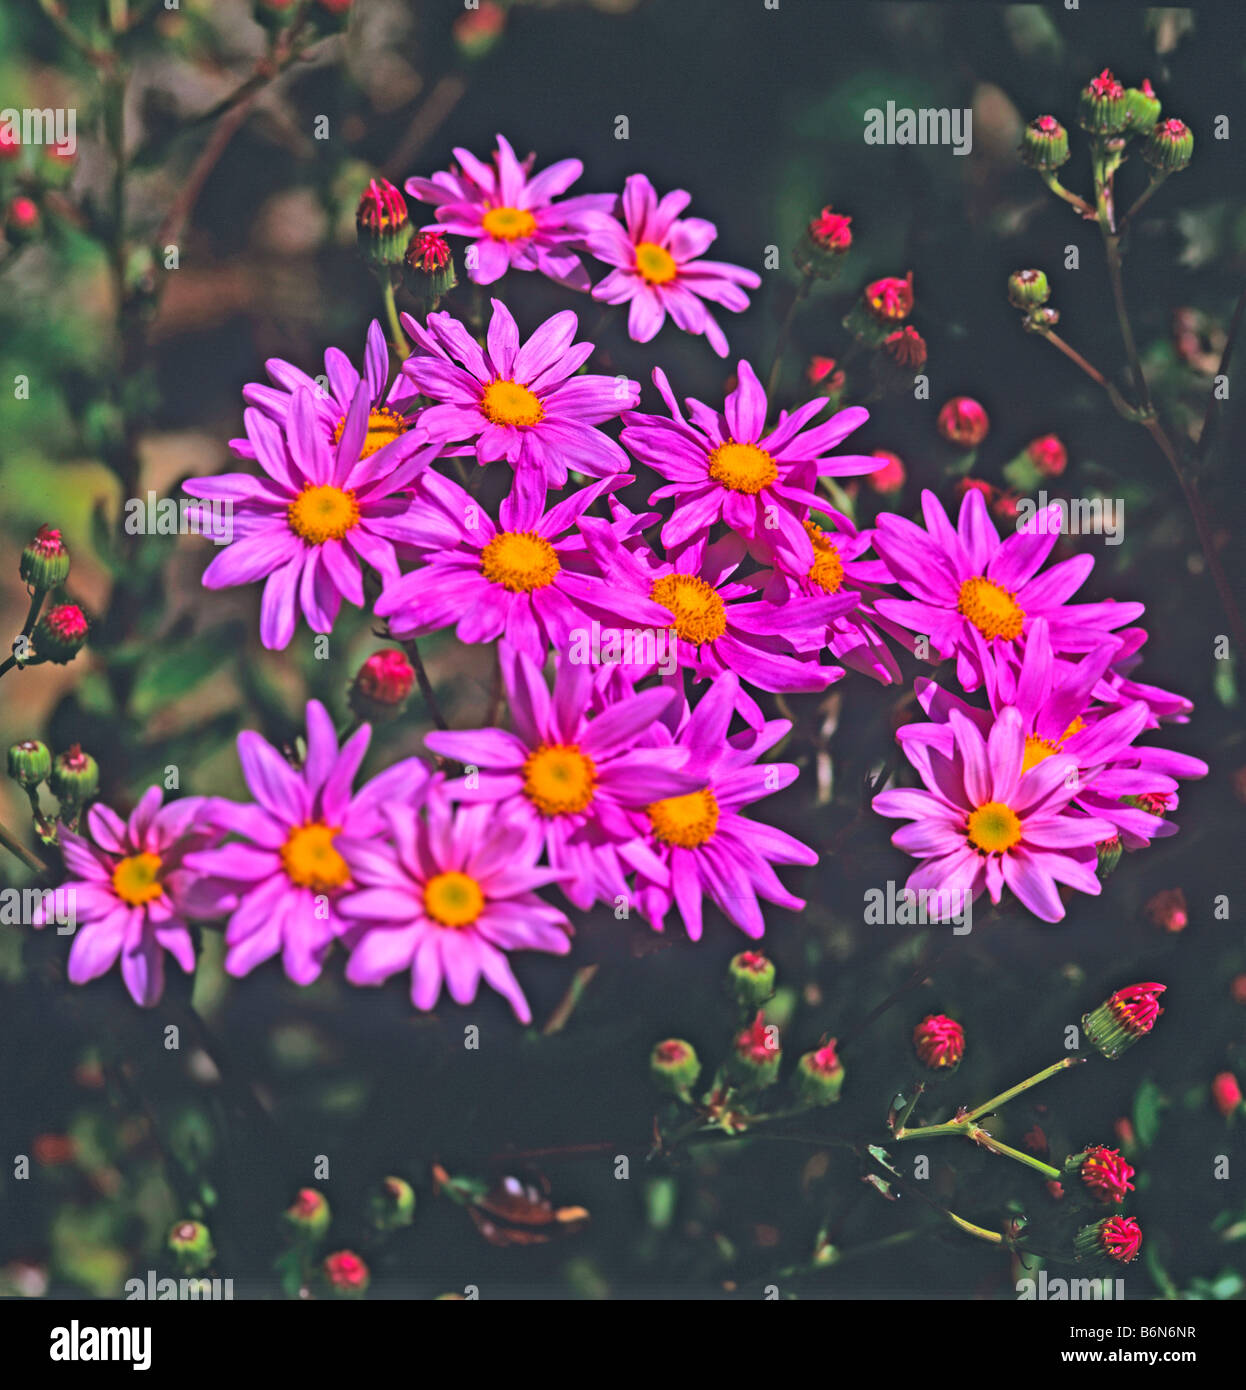 Flowers of the Aster amellus 'Brilliant' in a border Stock Photo